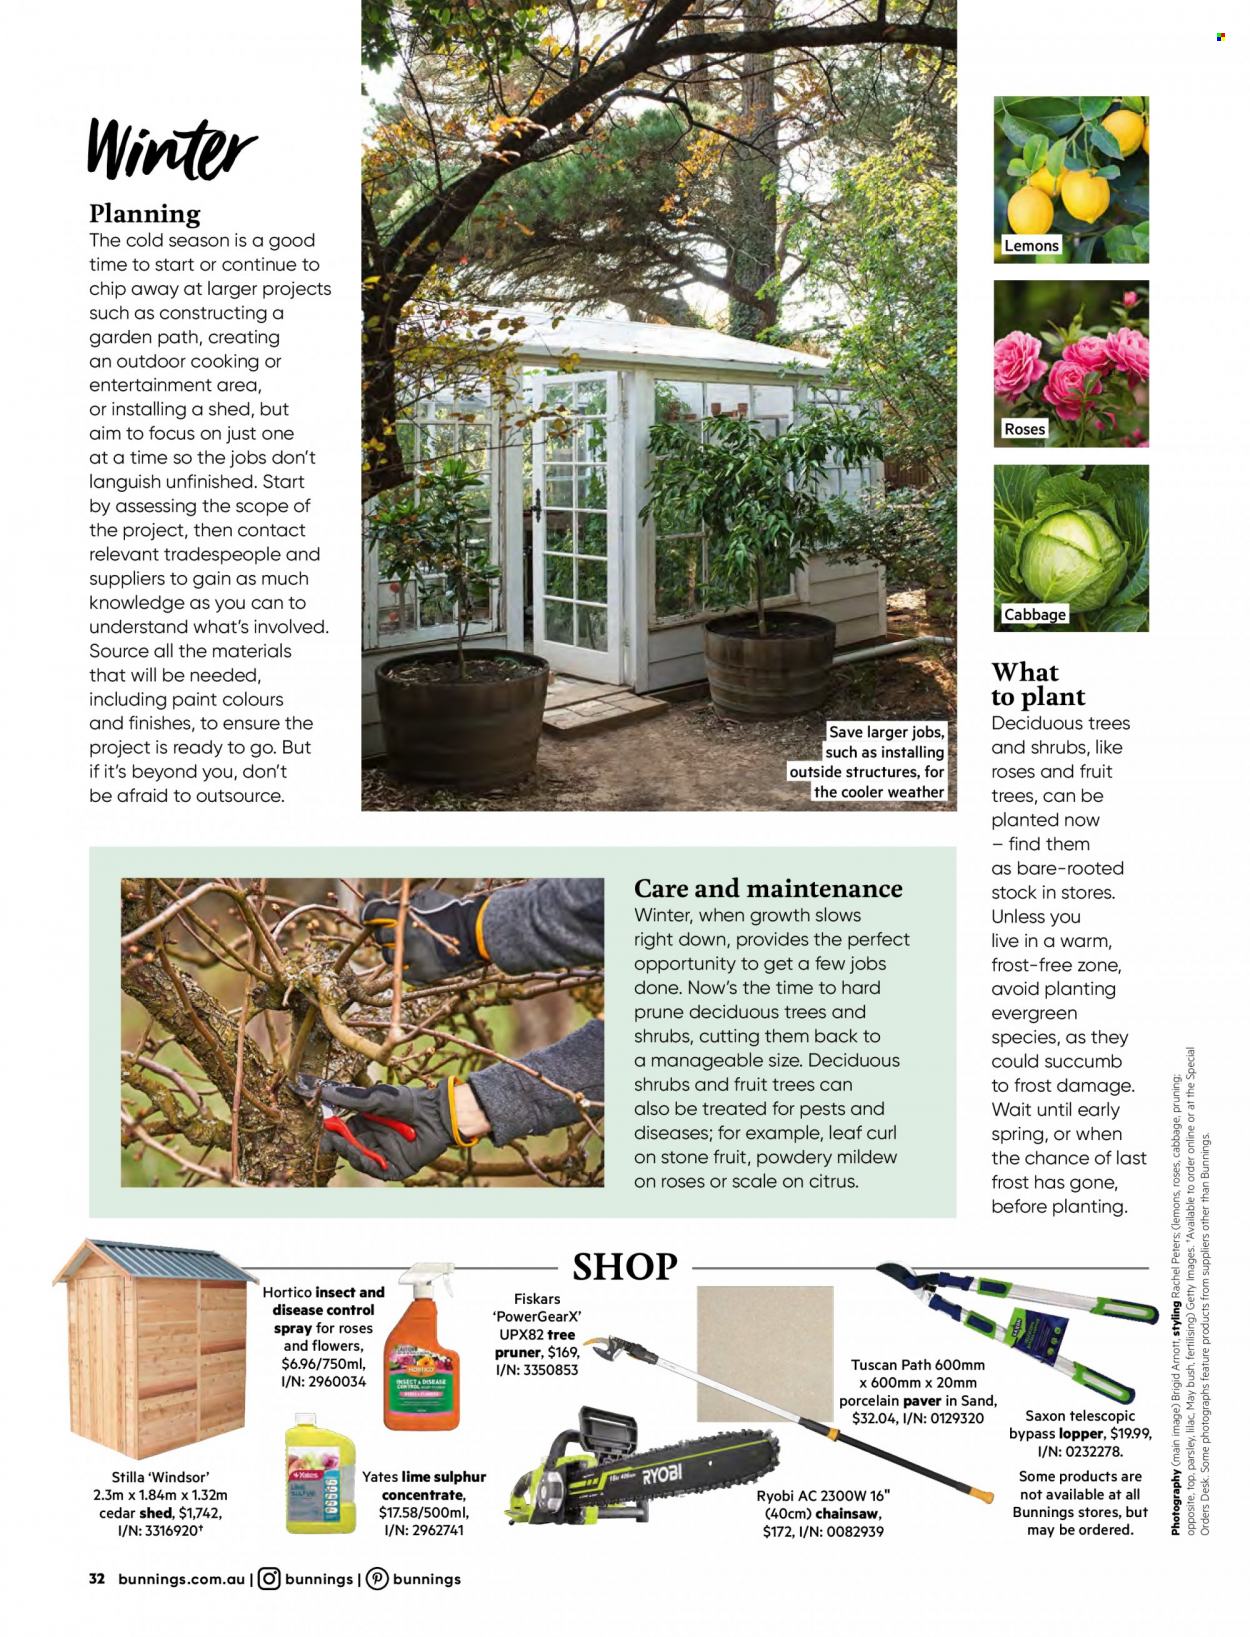 thumbnail - Bunnings Warehouse Catalogue - Sales products - desk, scale, Fiskars, paint, Ryobi, chain saw, tree pruner, shed, fruit tree, rose, Yates. Page 32.